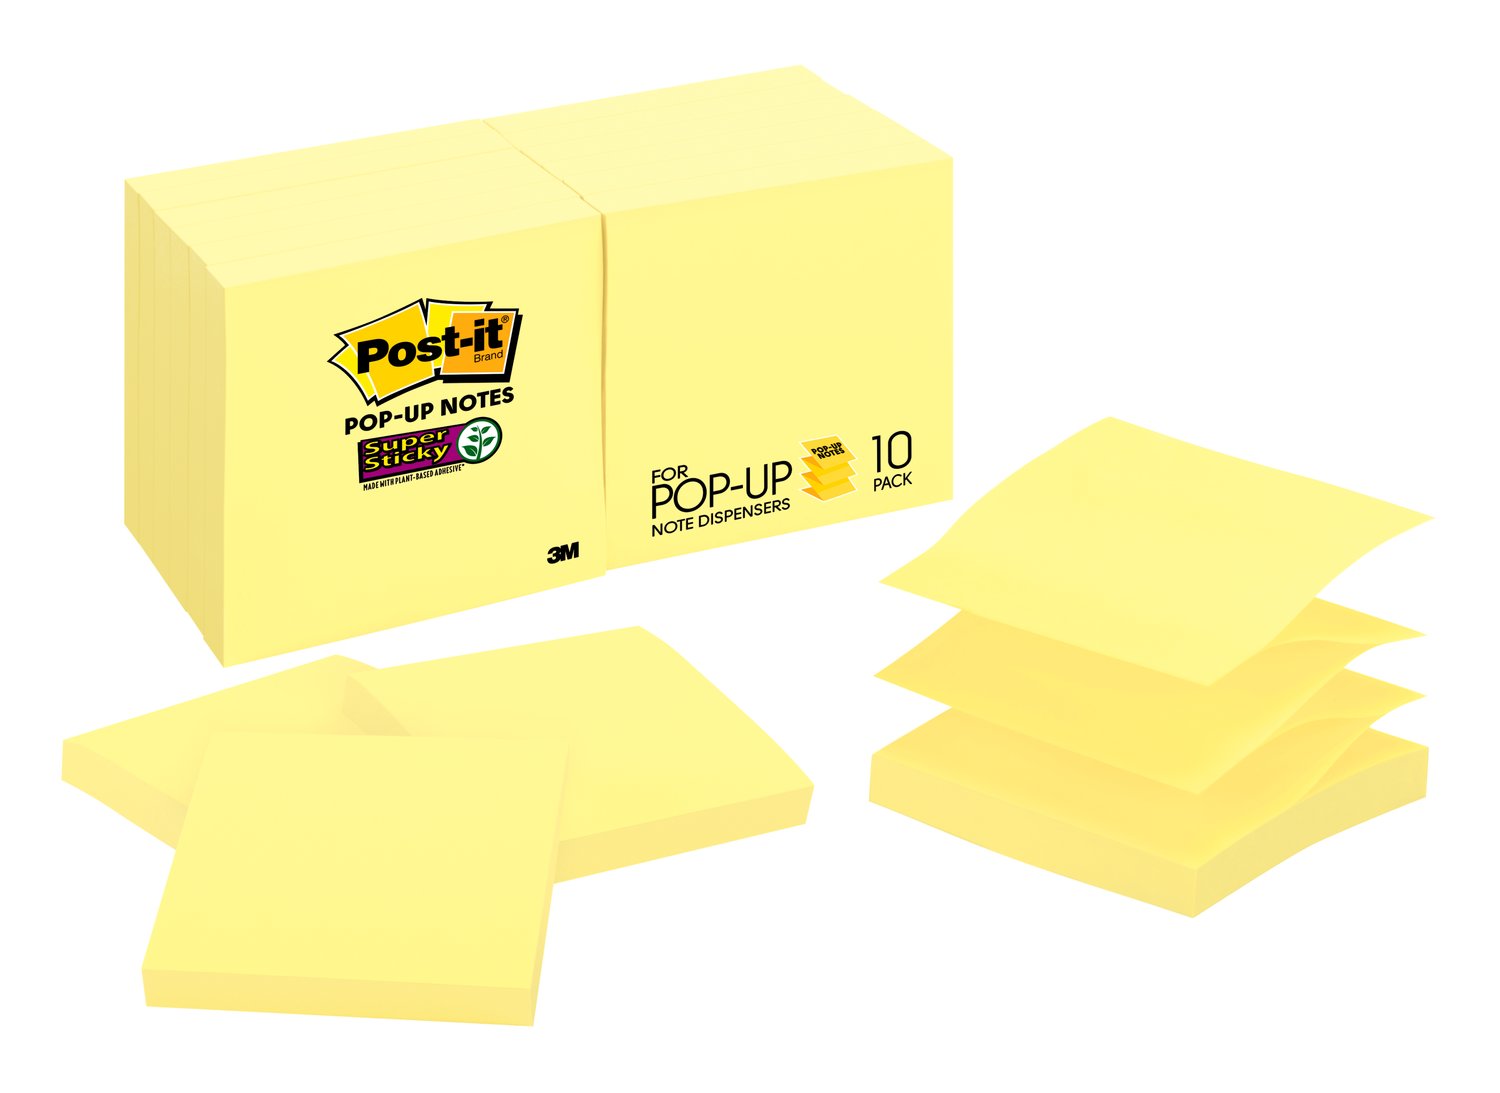 7100096705 - Post-it Super Sticky Dispenser Pop-up Notes R330-10SSCY, Canary Yellow, 3 in x 3 in, 90 sht/pad, 10 pad/pack